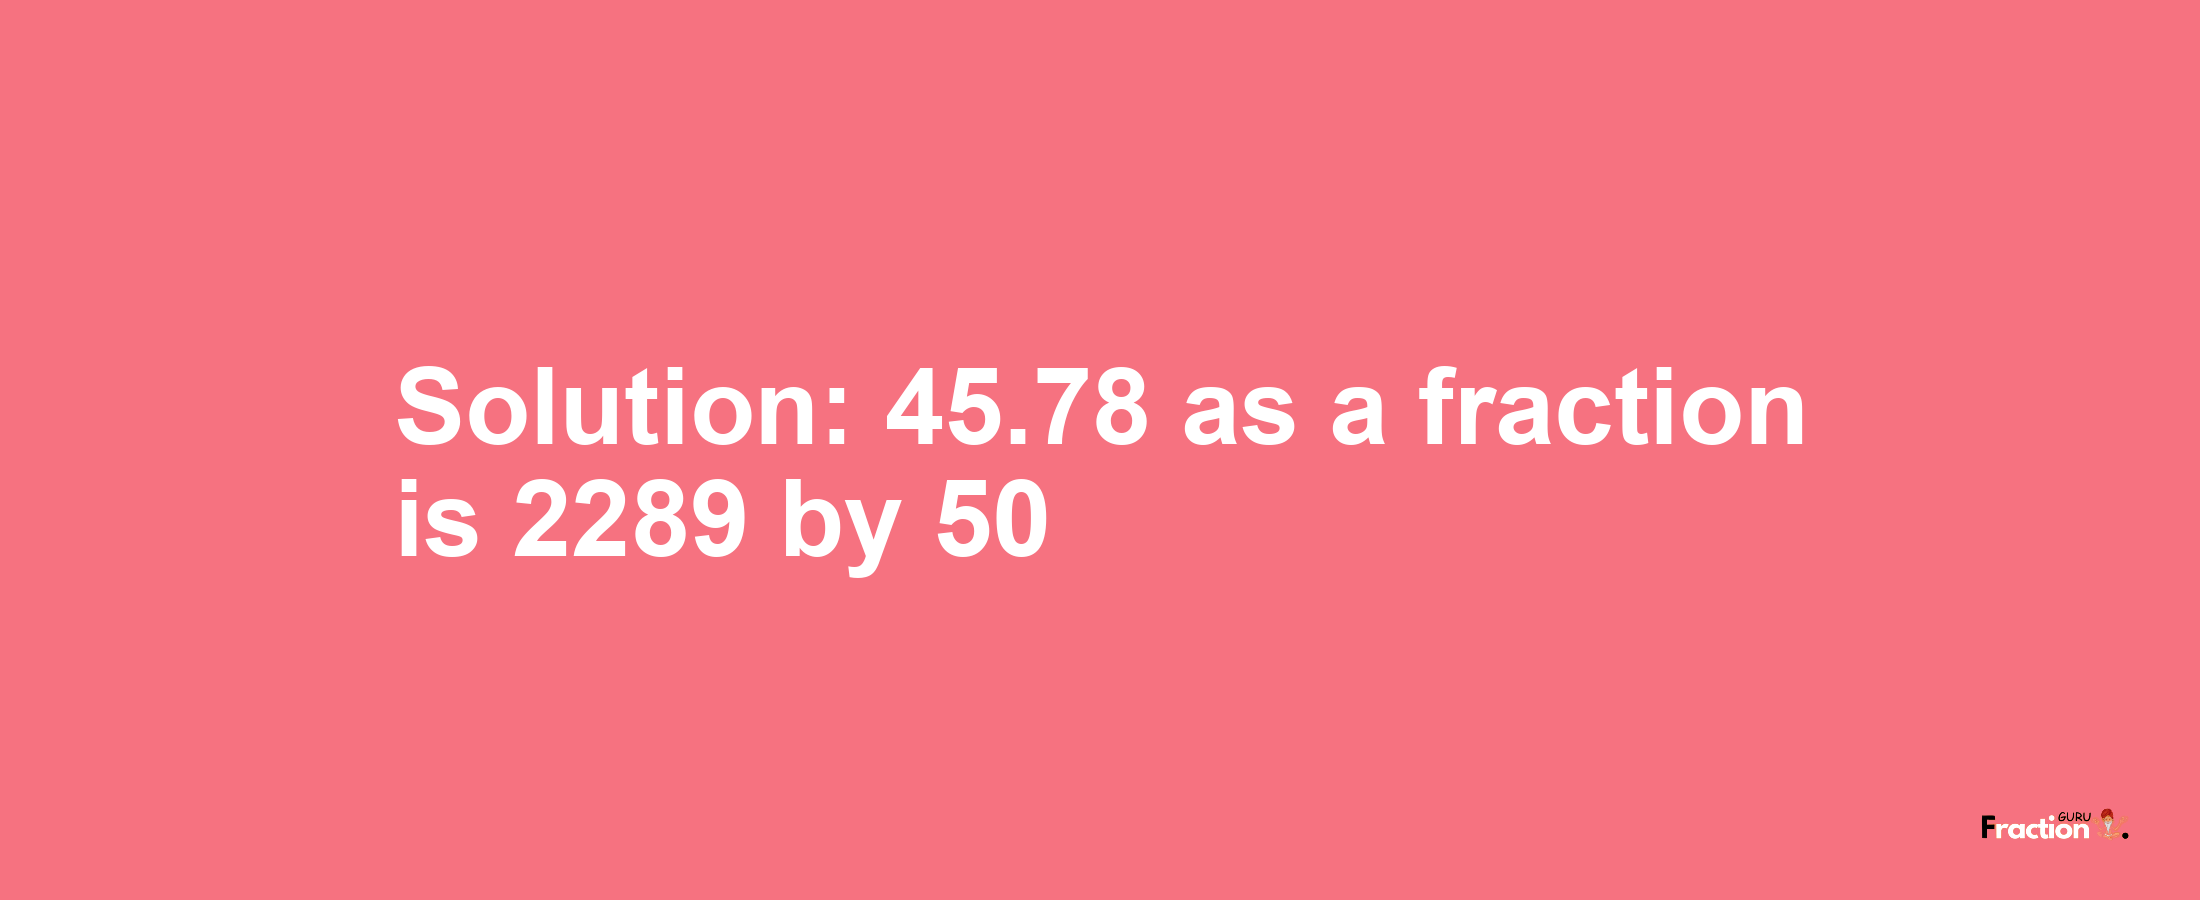 Solution:45.78 as a fraction is 2289/50